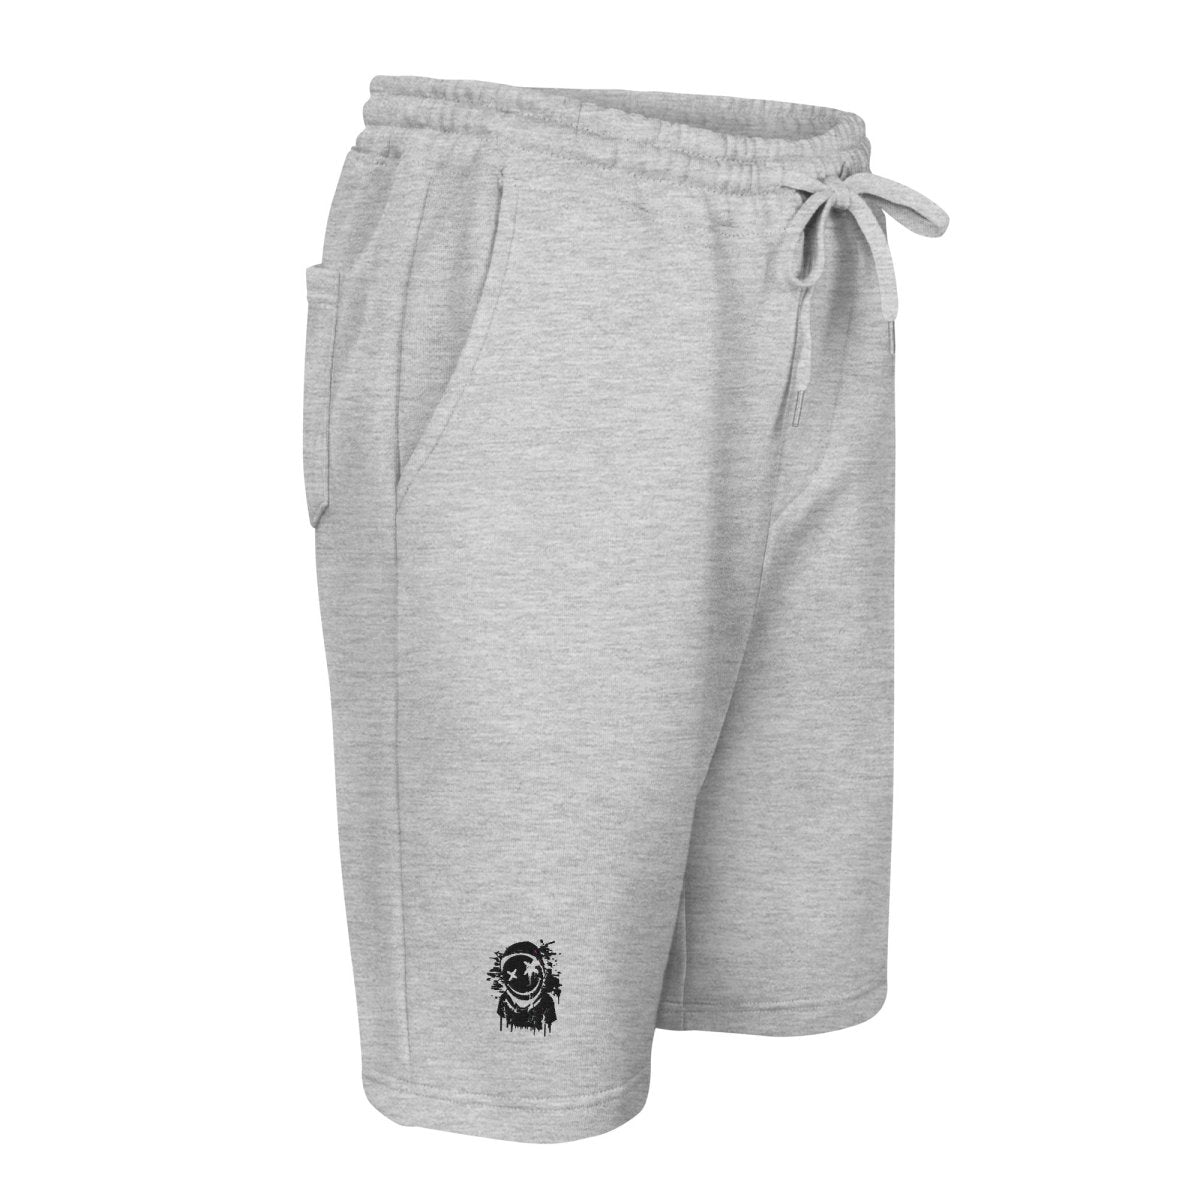 MH Classic Shorts Light Grey - Mainly High